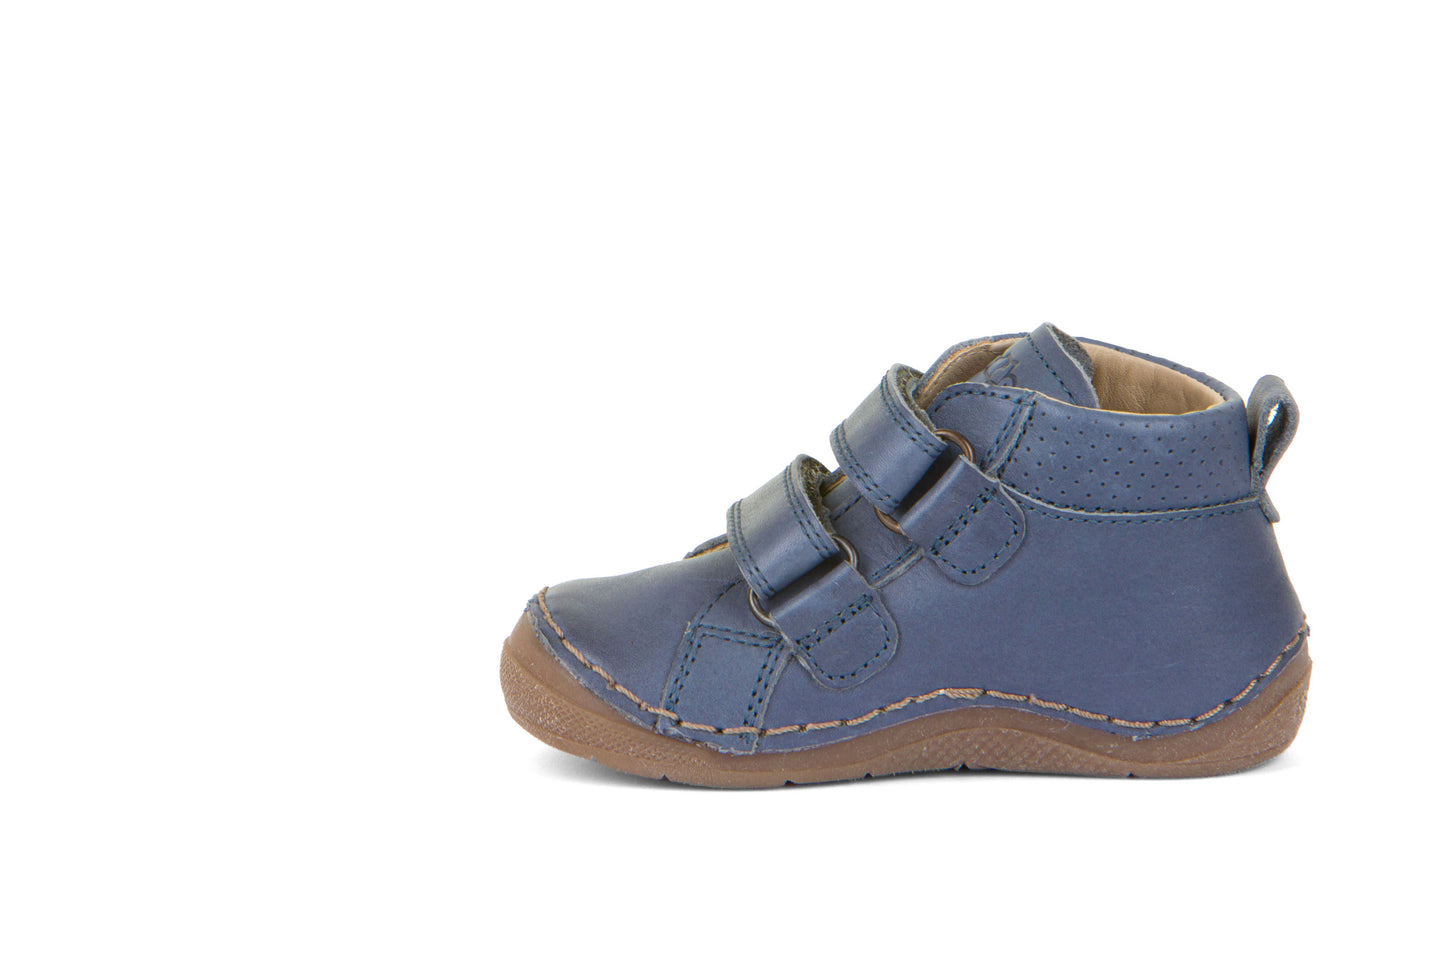 A boys boot by Froddo, style Paix Velcro G2130268-1 in Denim with double velcro fastening. Left side view.